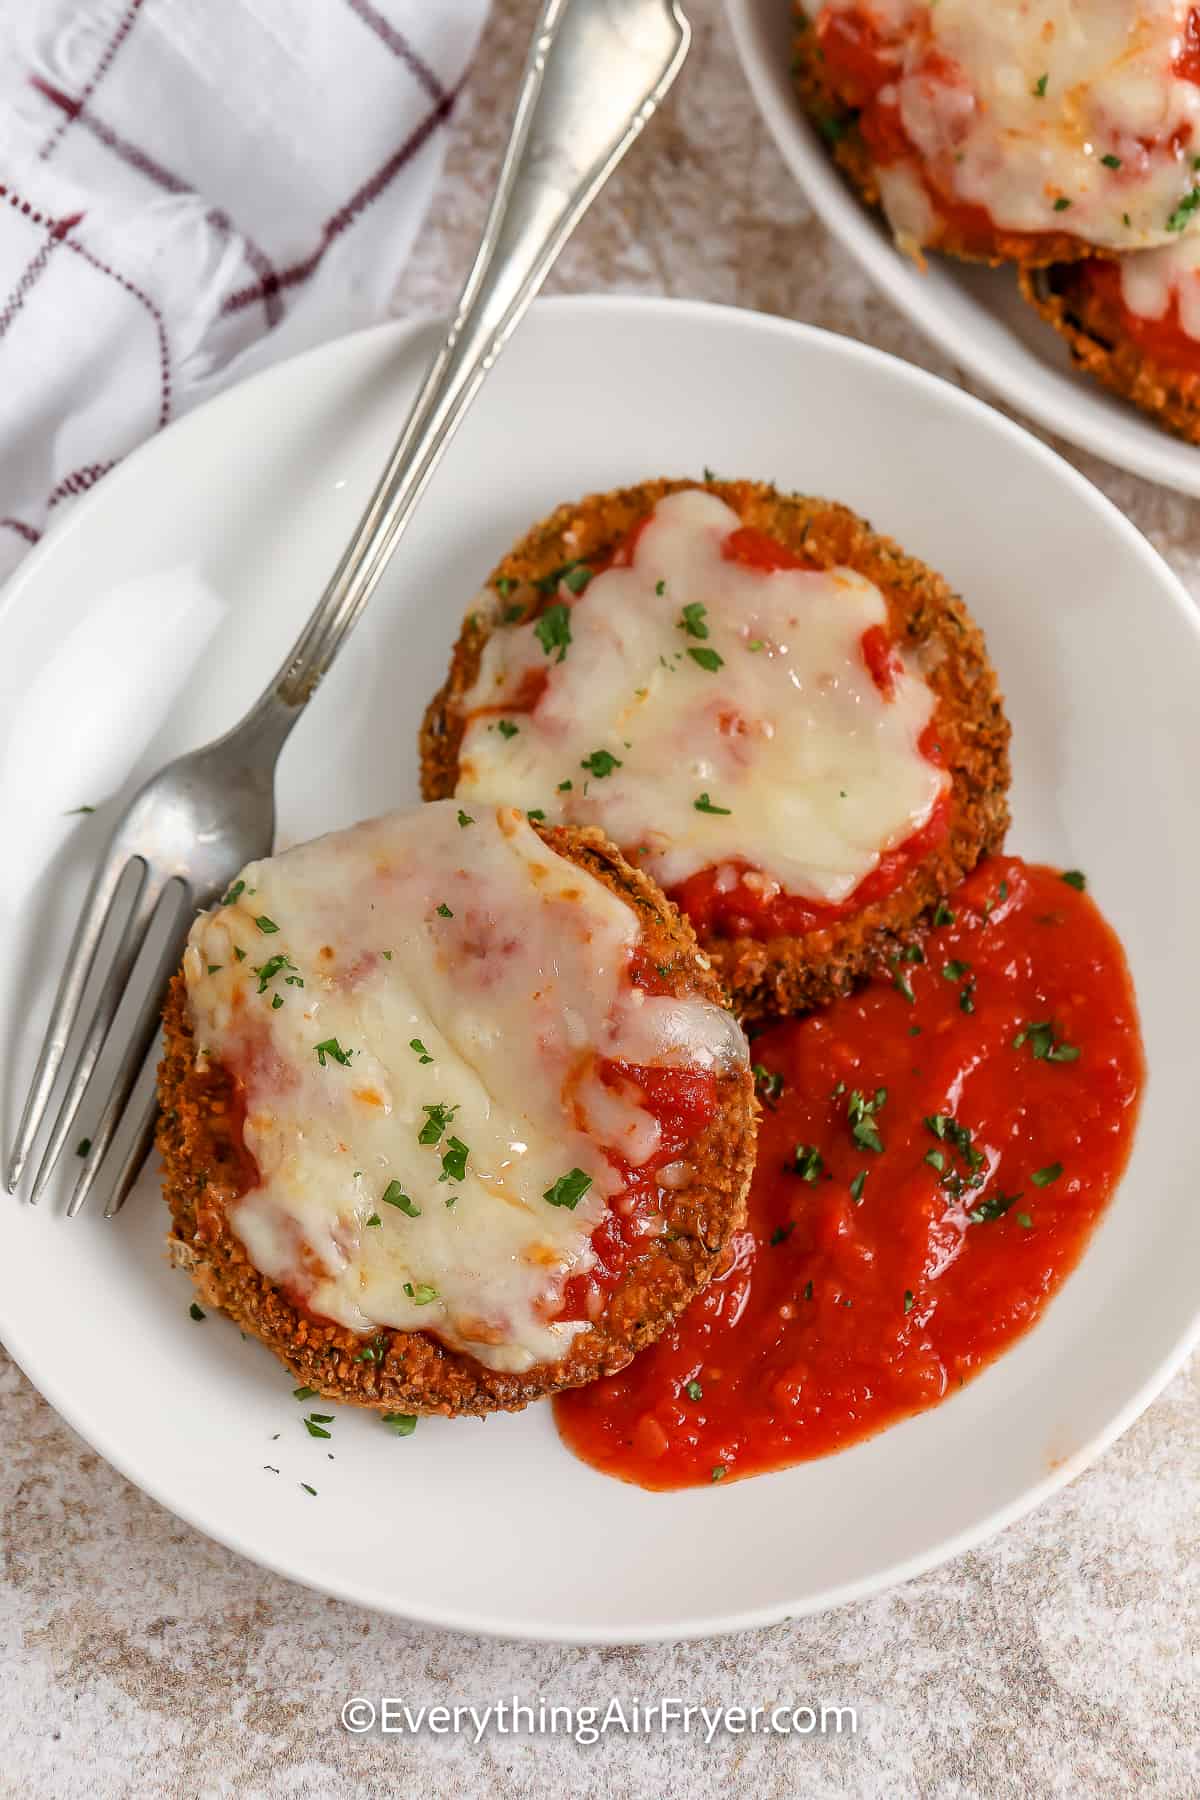 Two slices of Air Fryer Eggplant Parmesan on a plate garnished with parsley